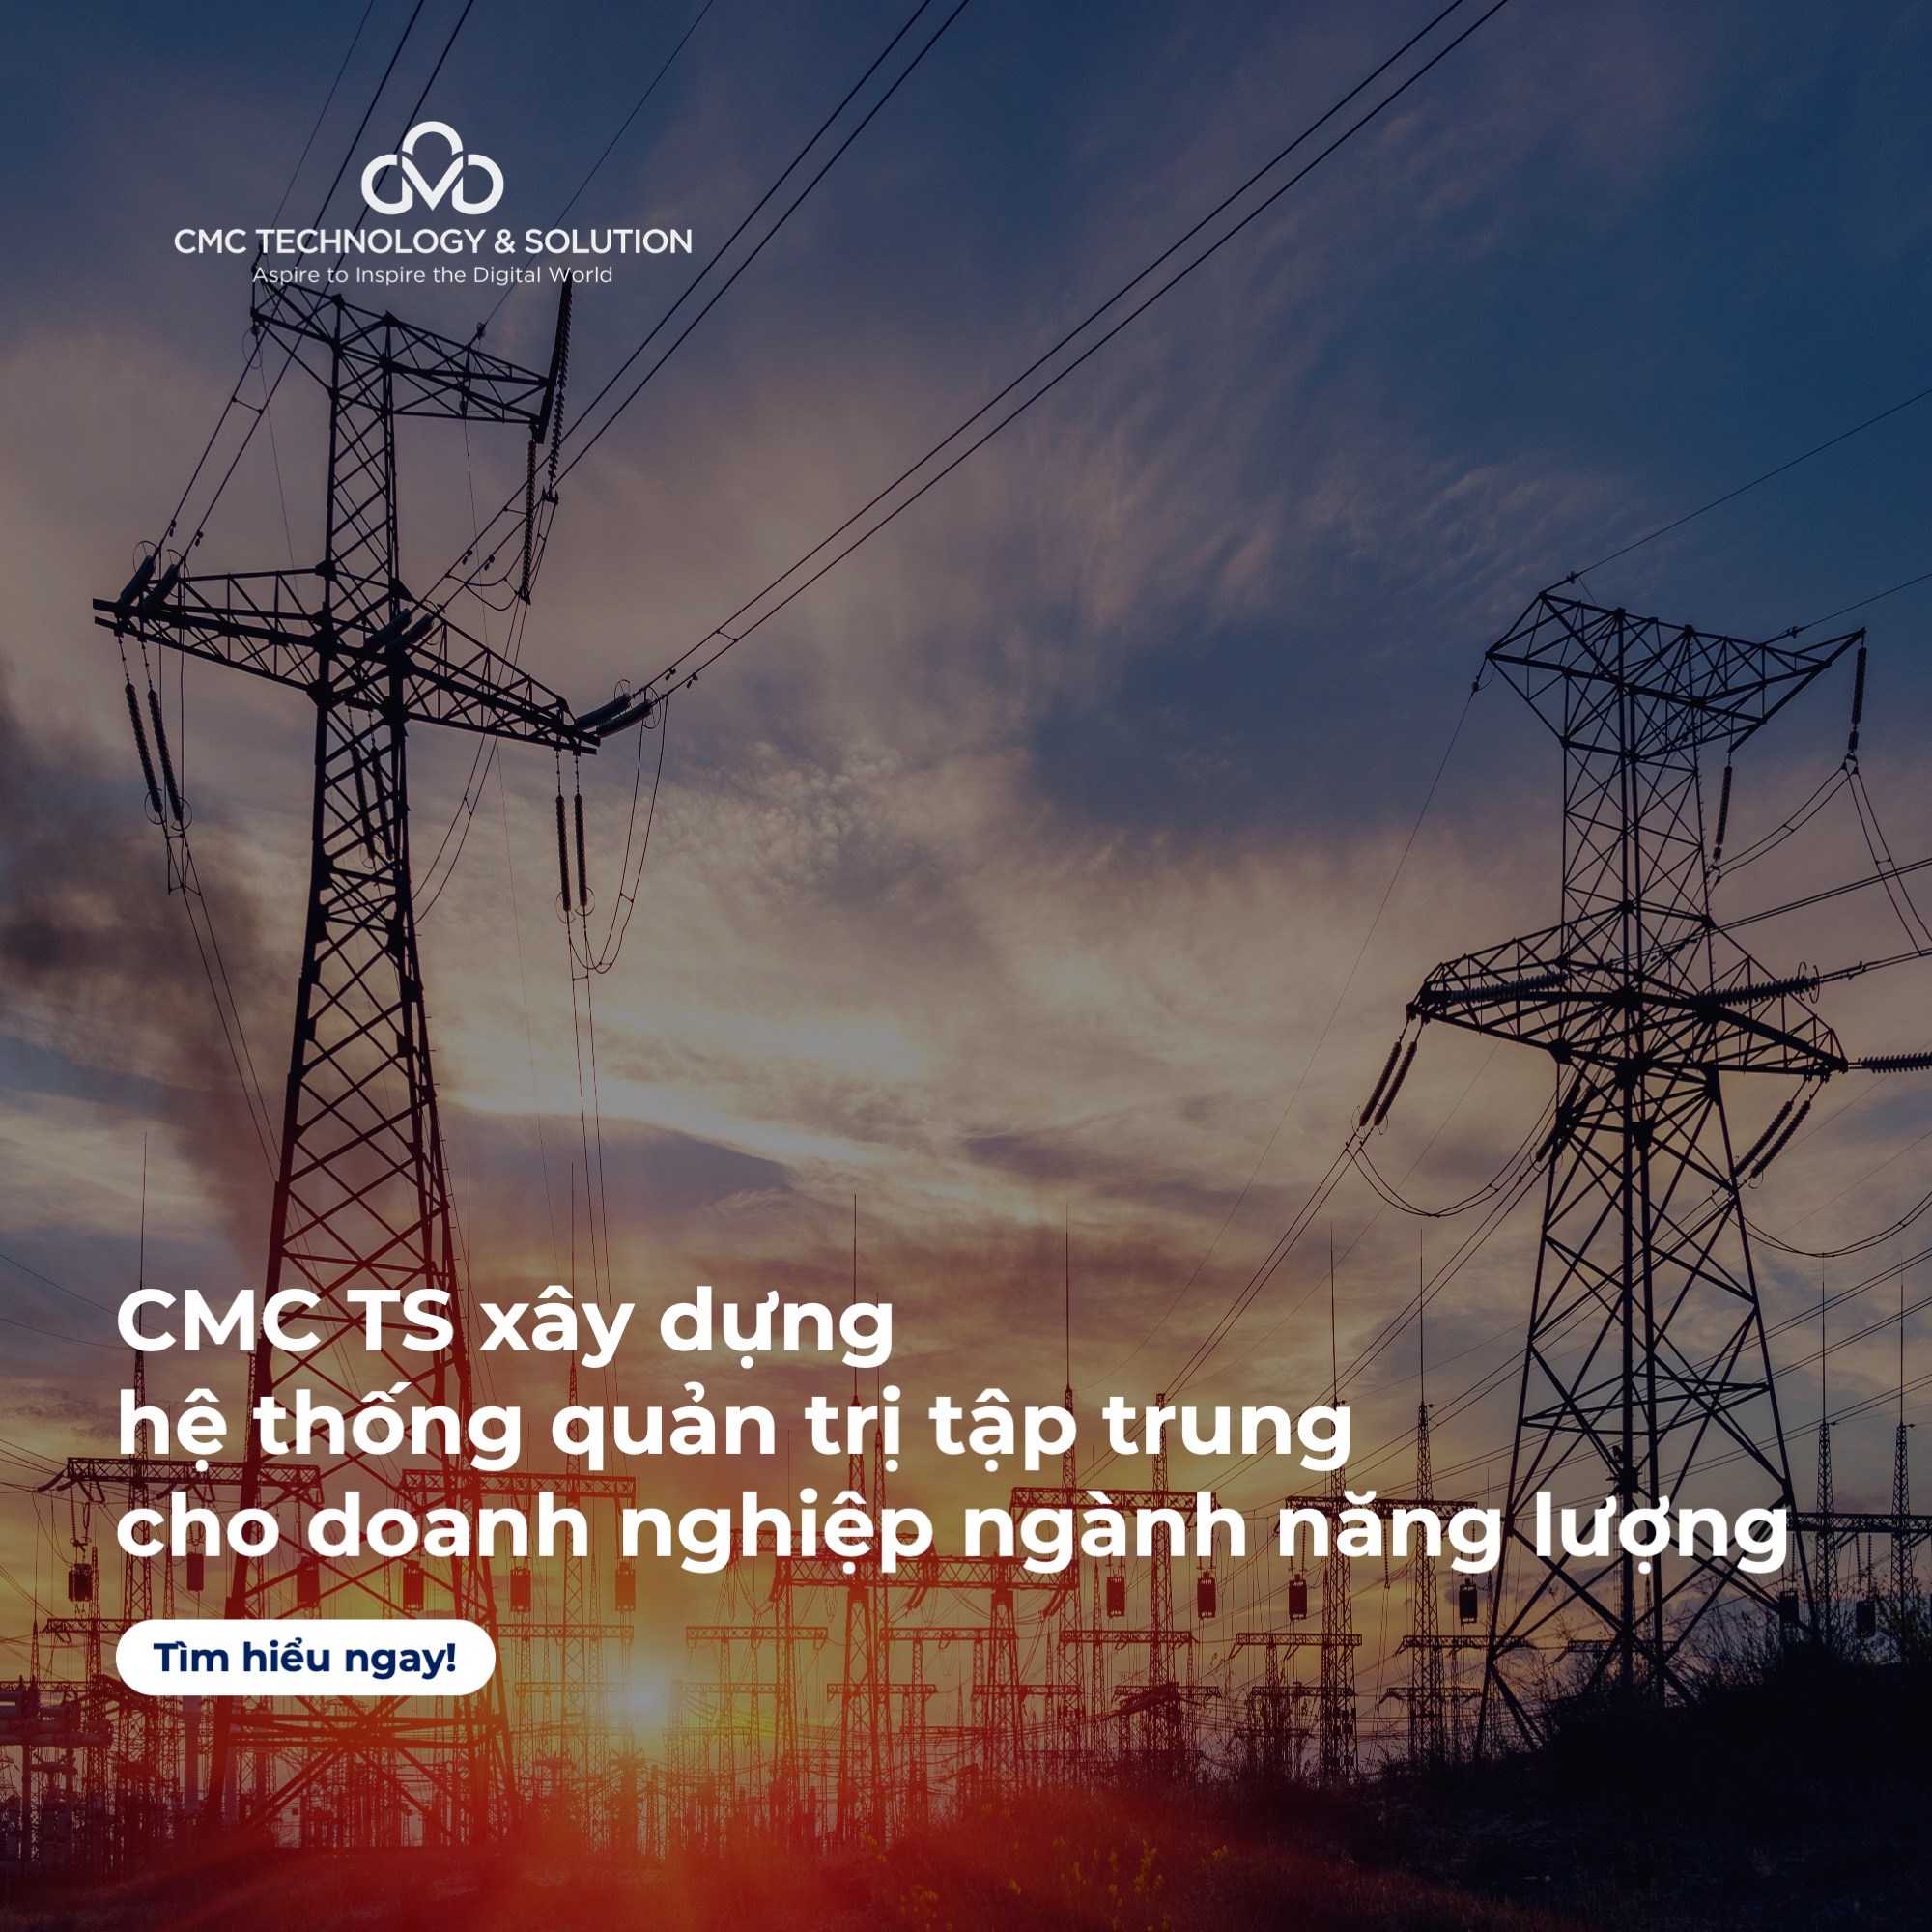 CMC TS deploys centralized management system for a company in the energy sector